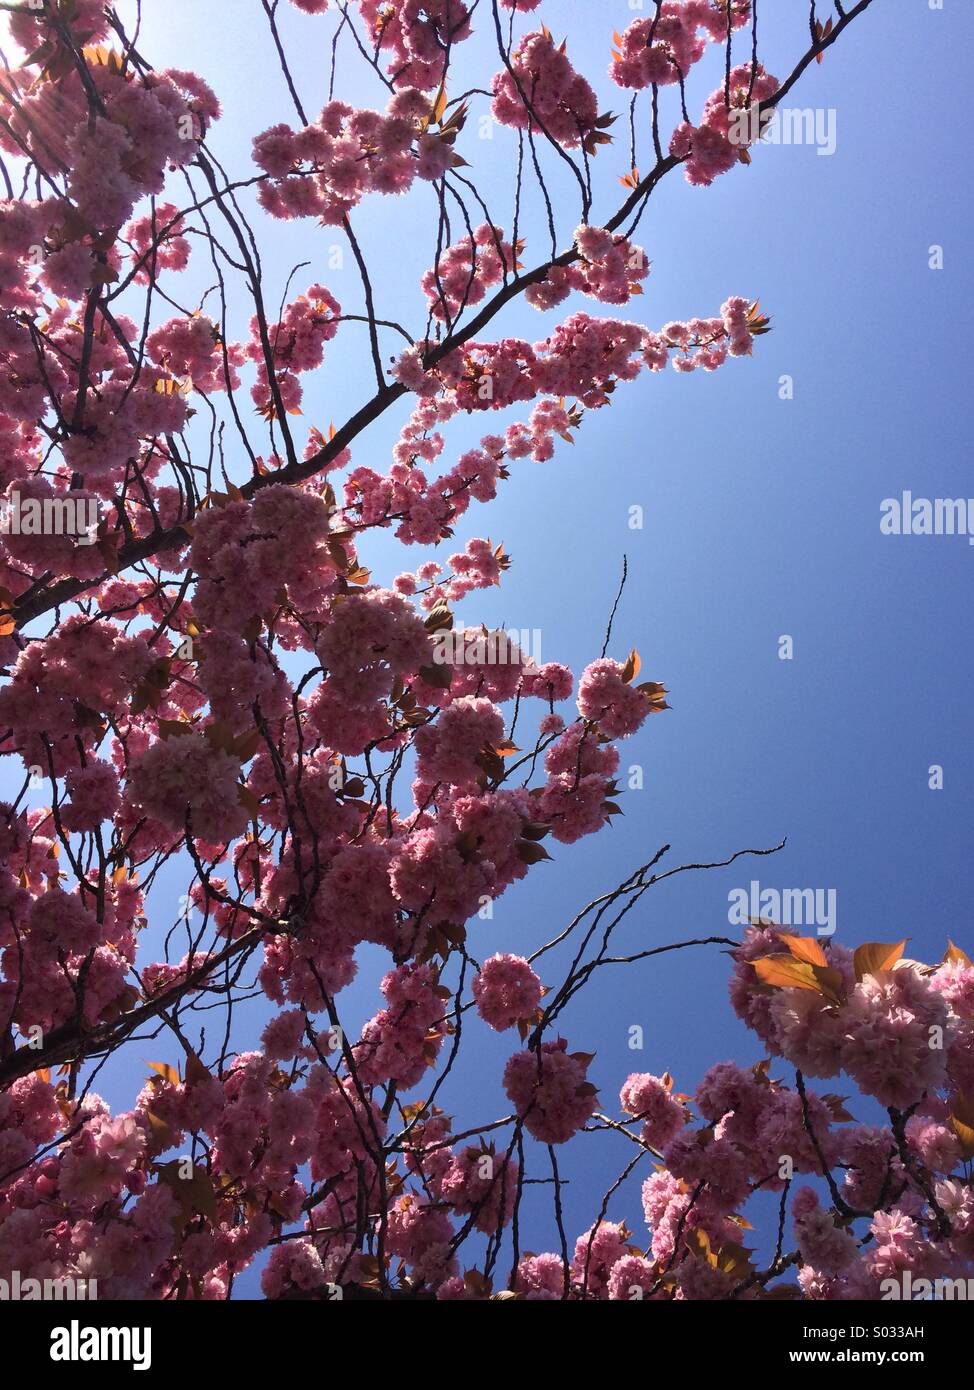 Blossom branches against a blue sky Stock Photo